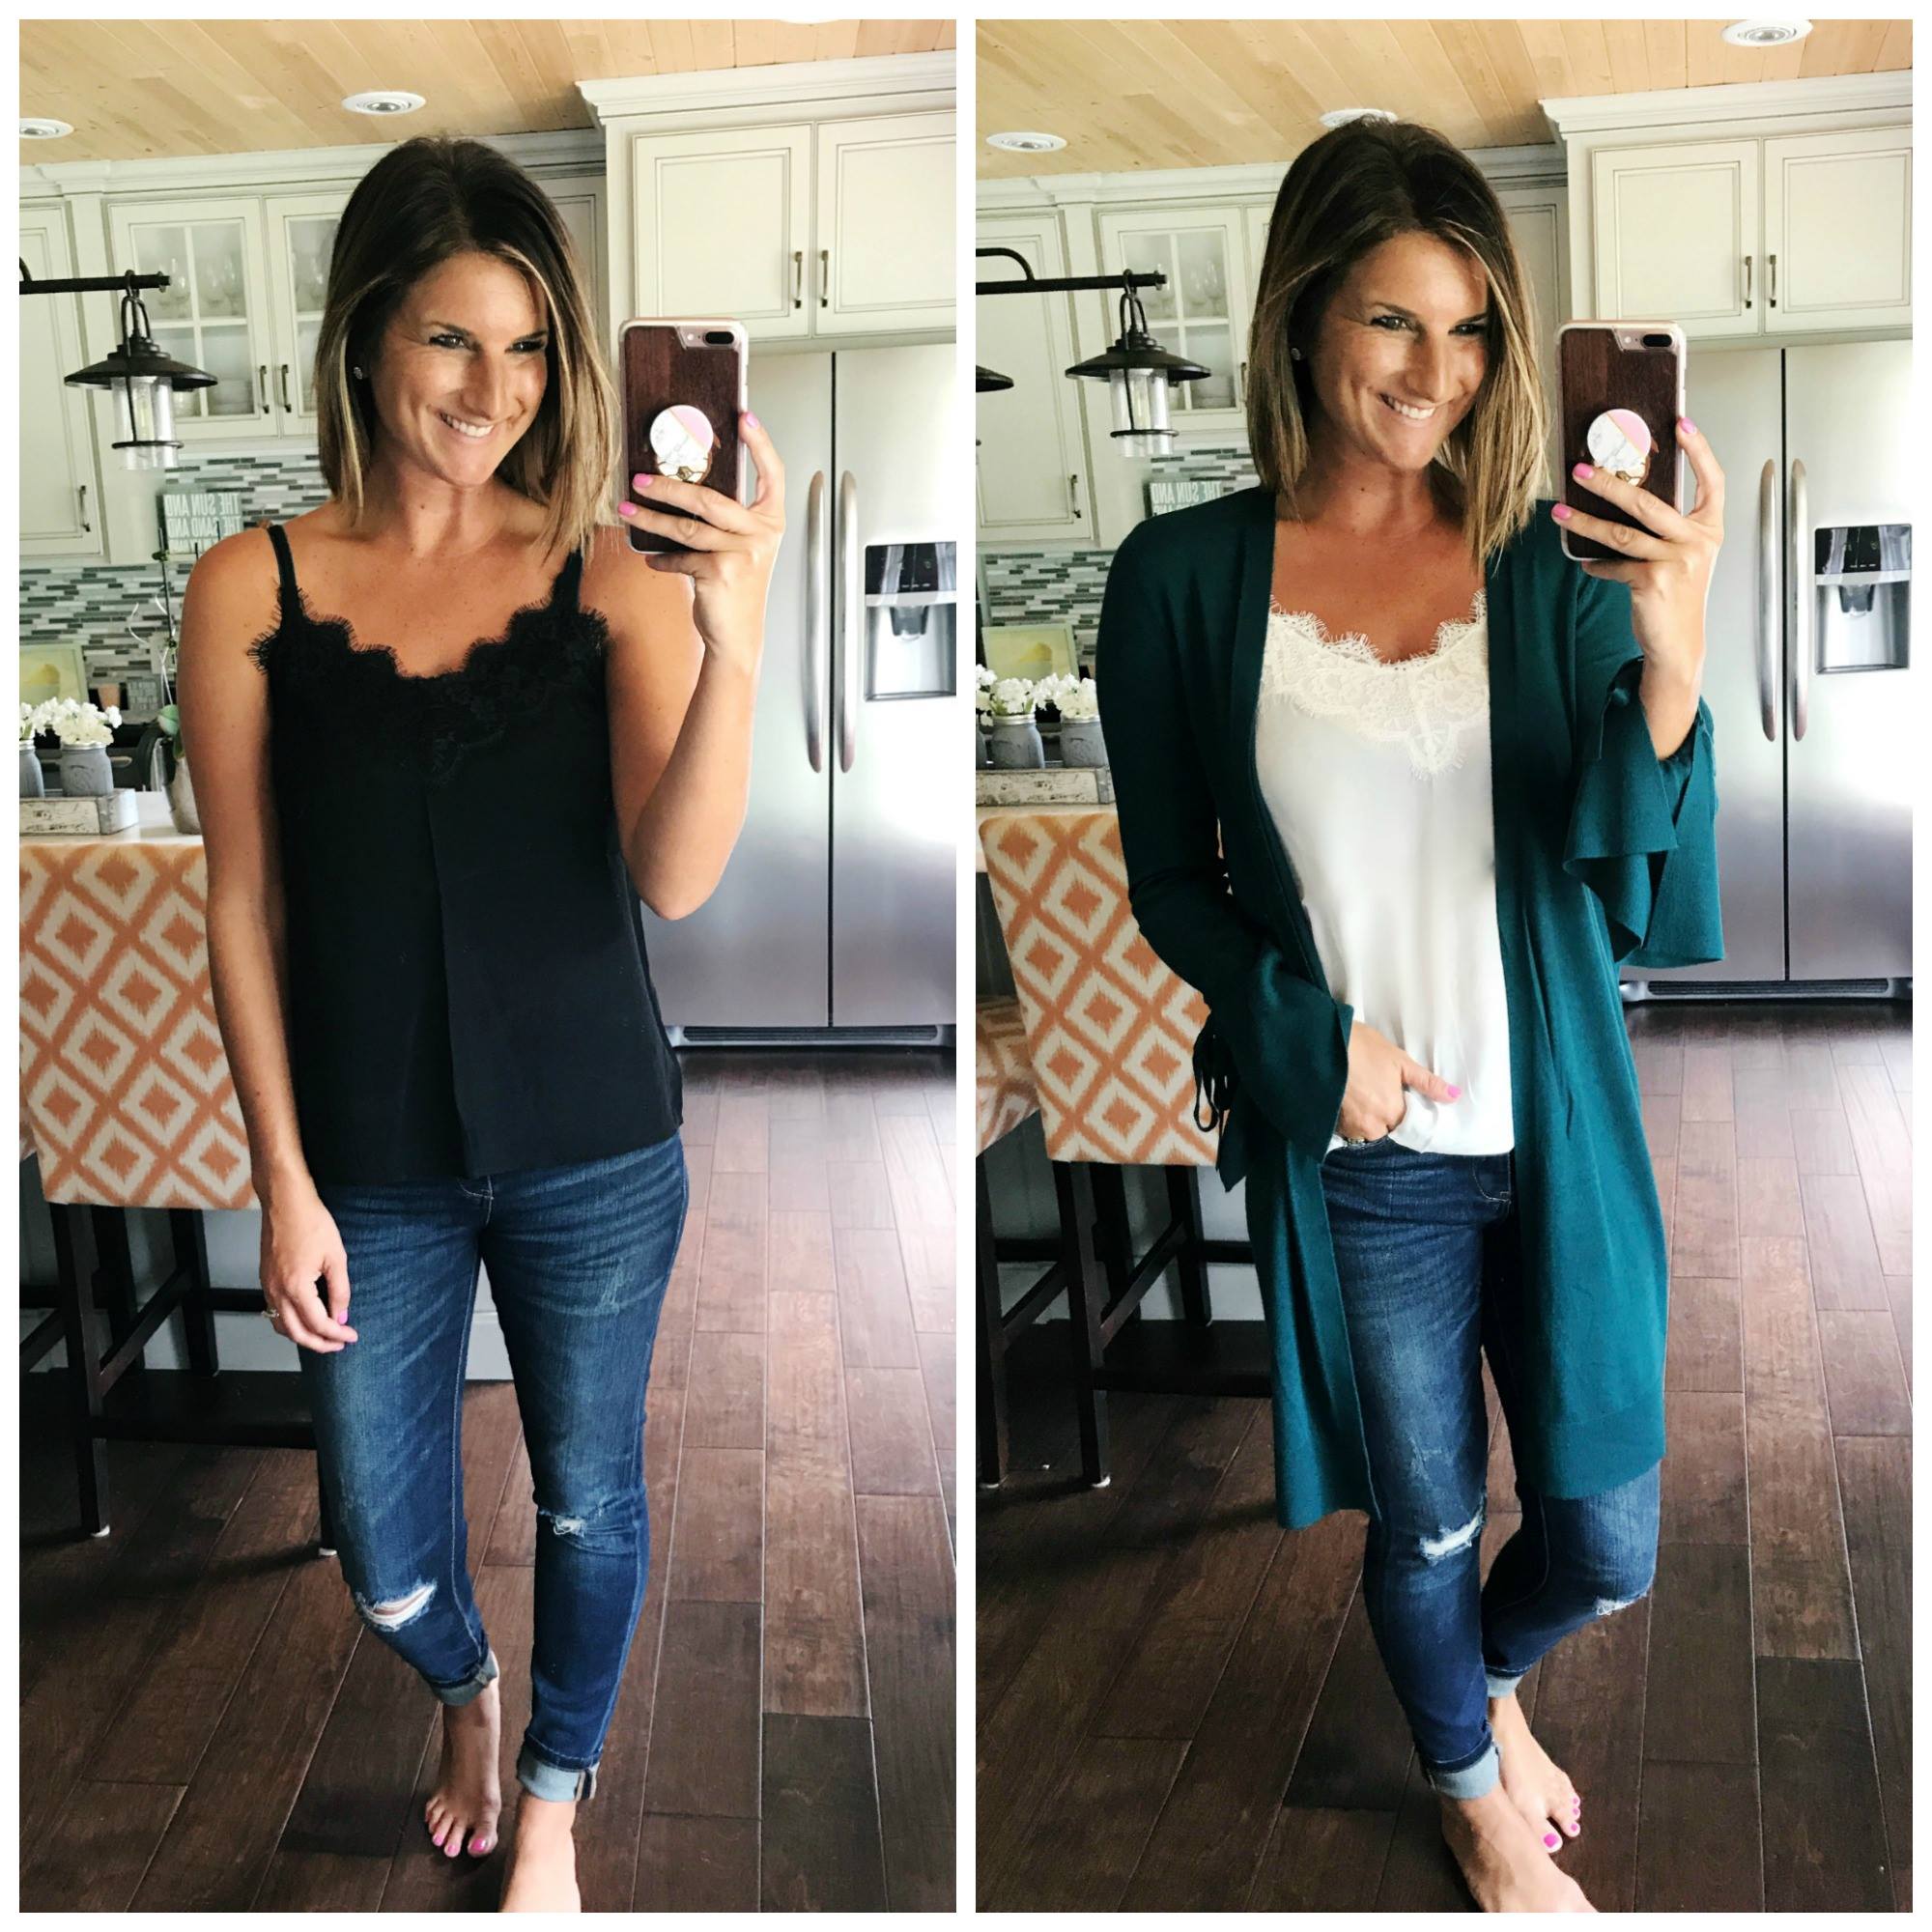 How to style a flirty camisole